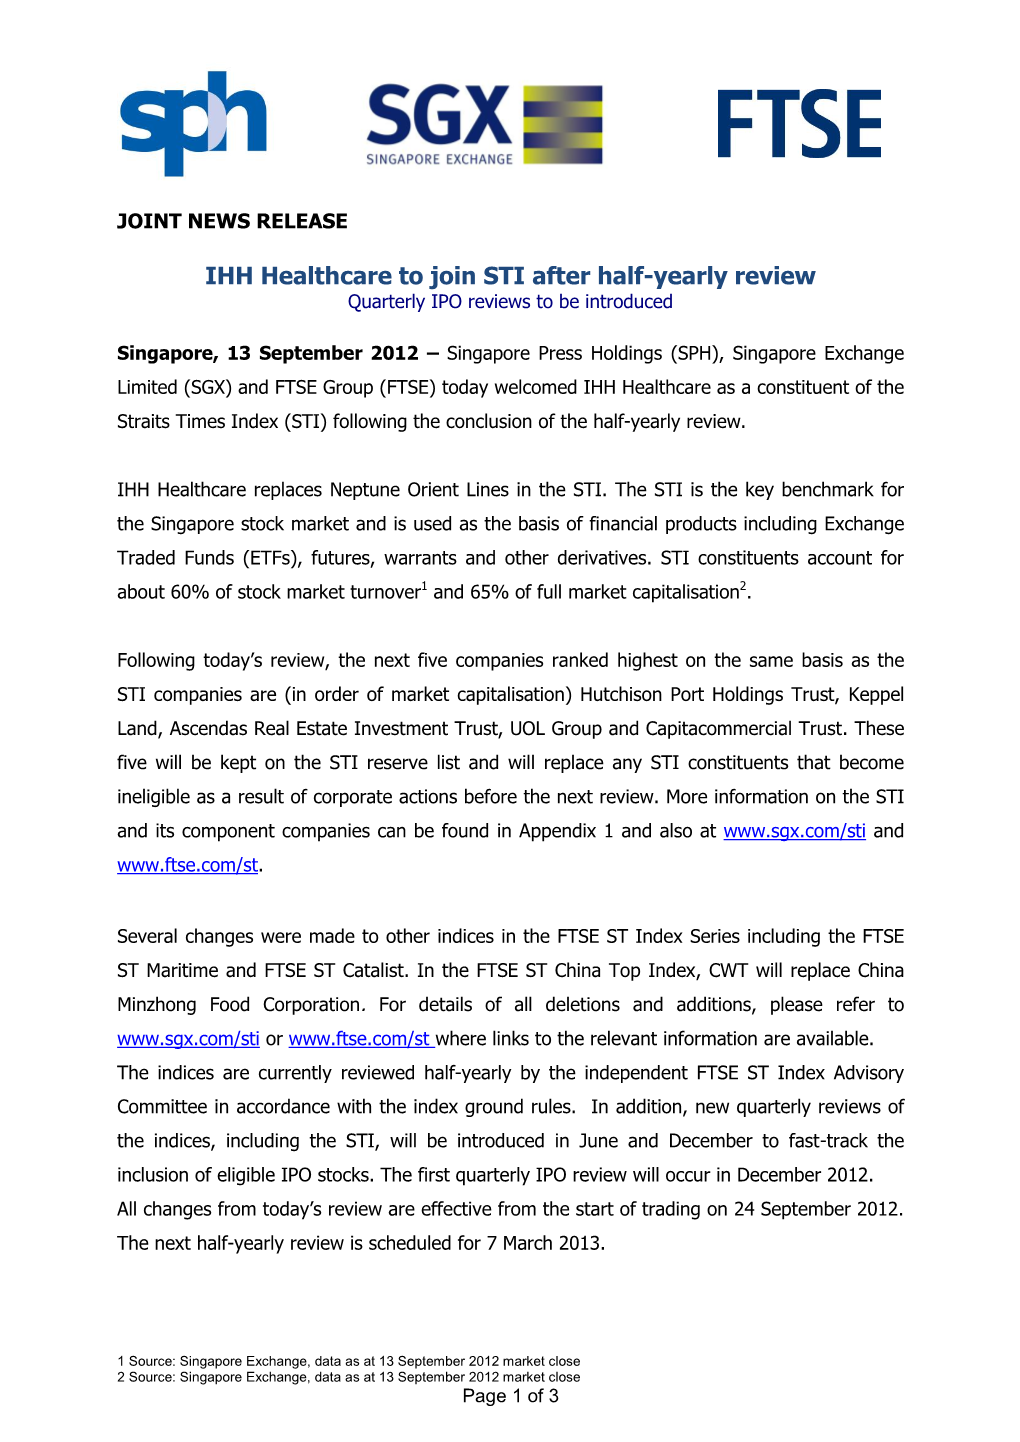 IHH Healthcare to Join STI After Half-Yearly Review Quarterly IPO Reviews to Be Introduced